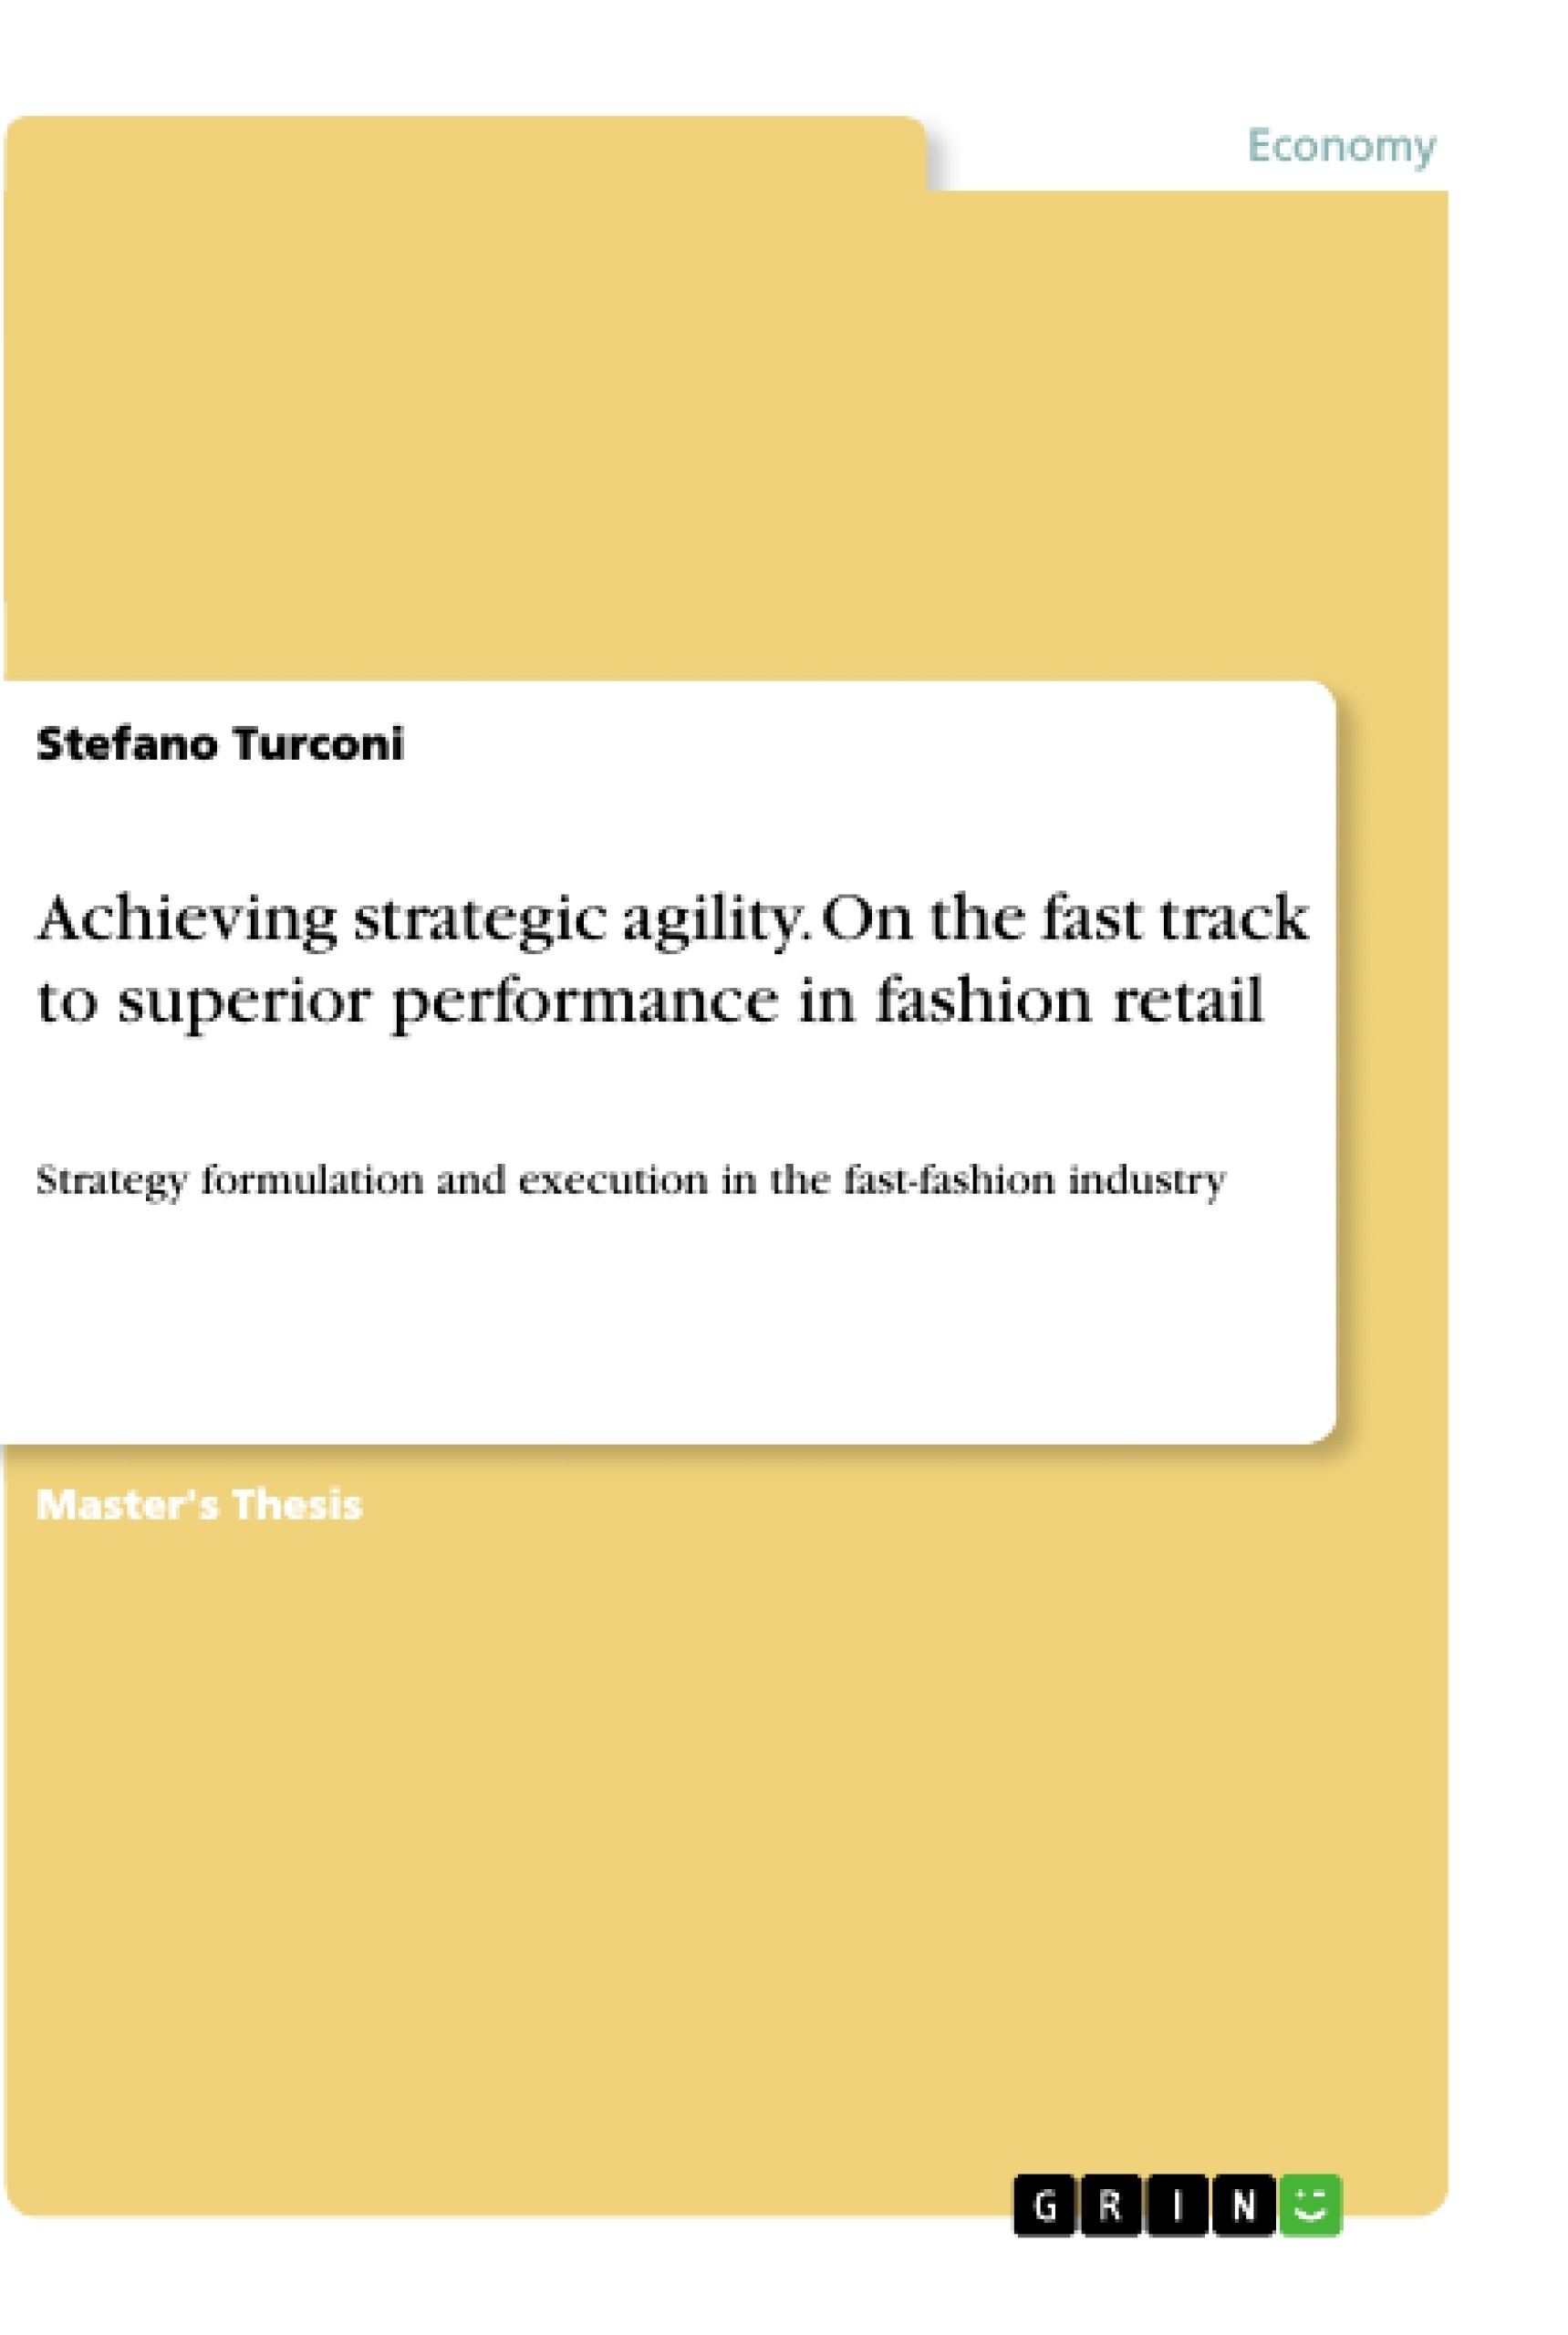 Título: Achieving strategic agility. On the fast track to superior performance in fashion retail